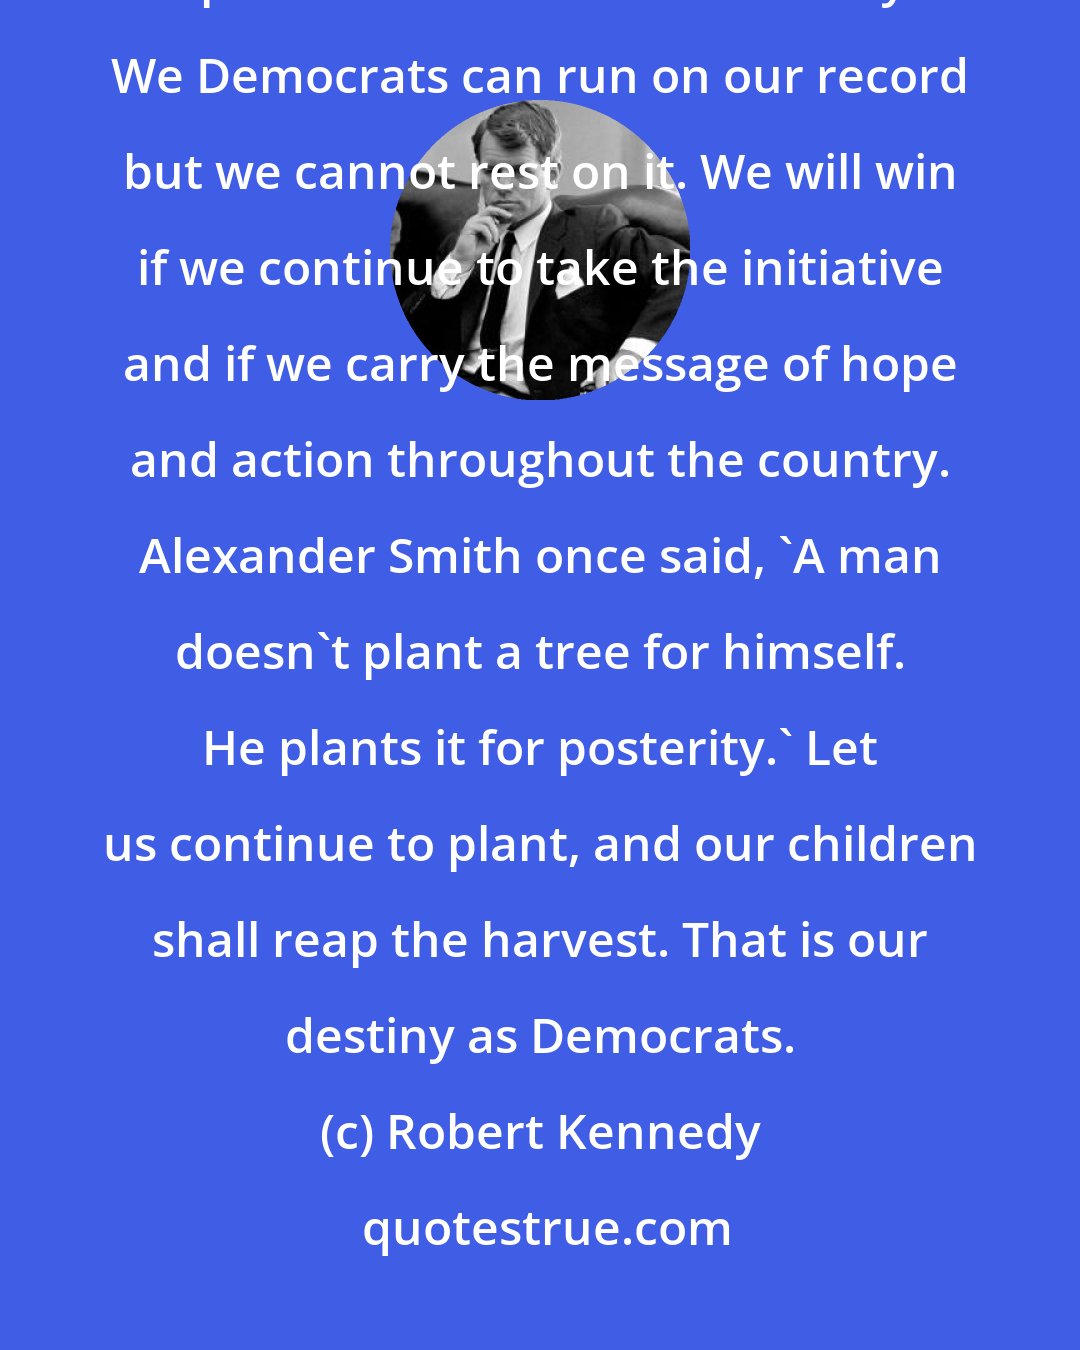 Robert Kennedy: And as long as America must choose, that long will there be a need and a place for the Democratic Party. We Democrats can run on our record but we cannot rest on it. We will win if we continue to take the initiative and if we carry the message of hope and action throughout the country. Alexander Smith once said, 'A man doesn't plant a tree for himself. He plants it for posterity.' Let us continue to plant, and our children shall reap the harvest. That is our destiny as Democrats.